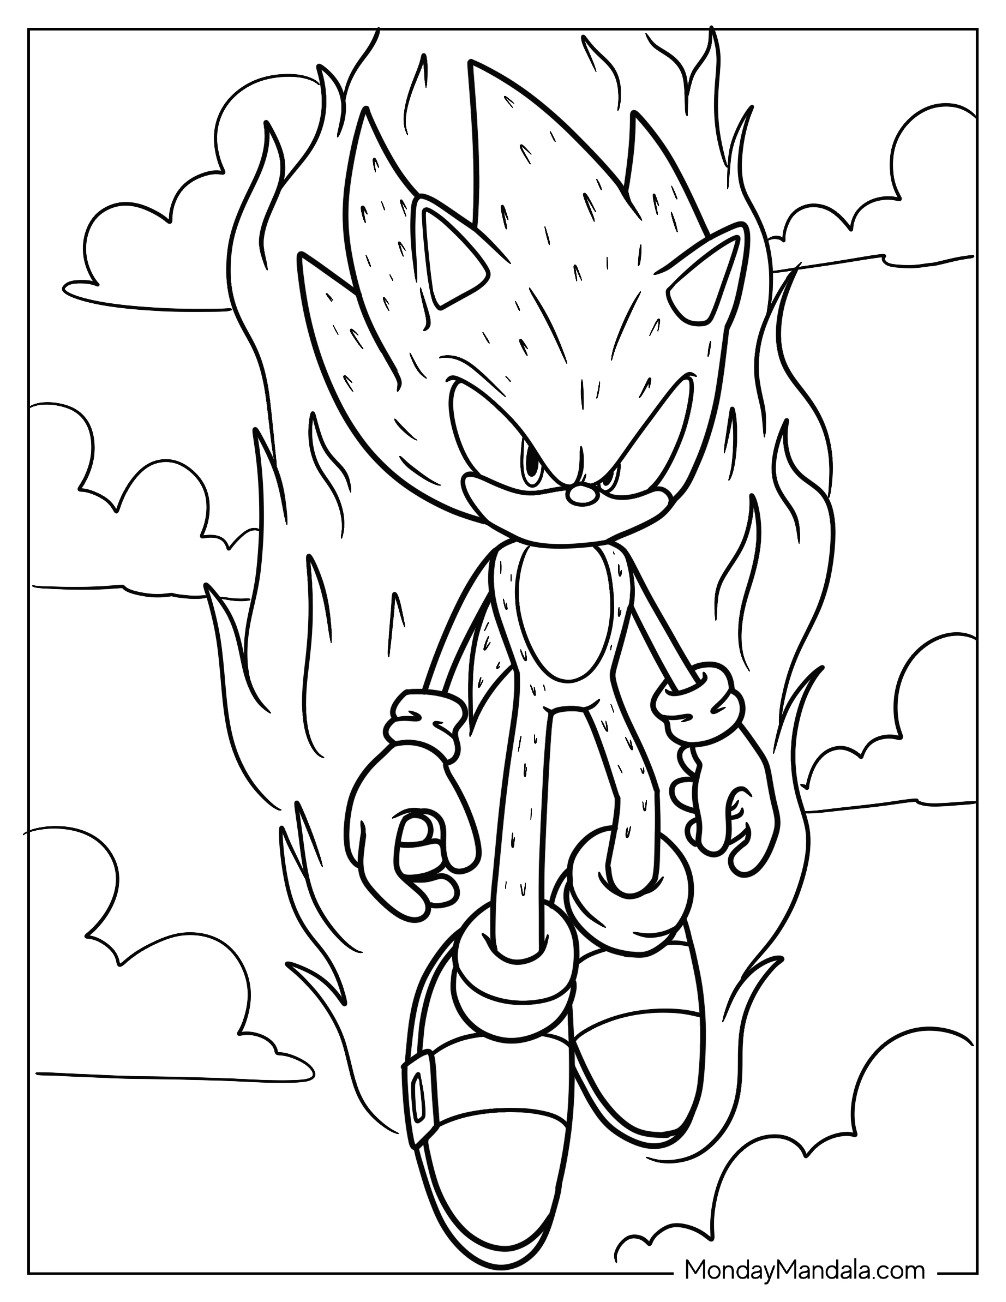 133 Dirt Bike Coloring Pages: Rev Up Your Creativity 59